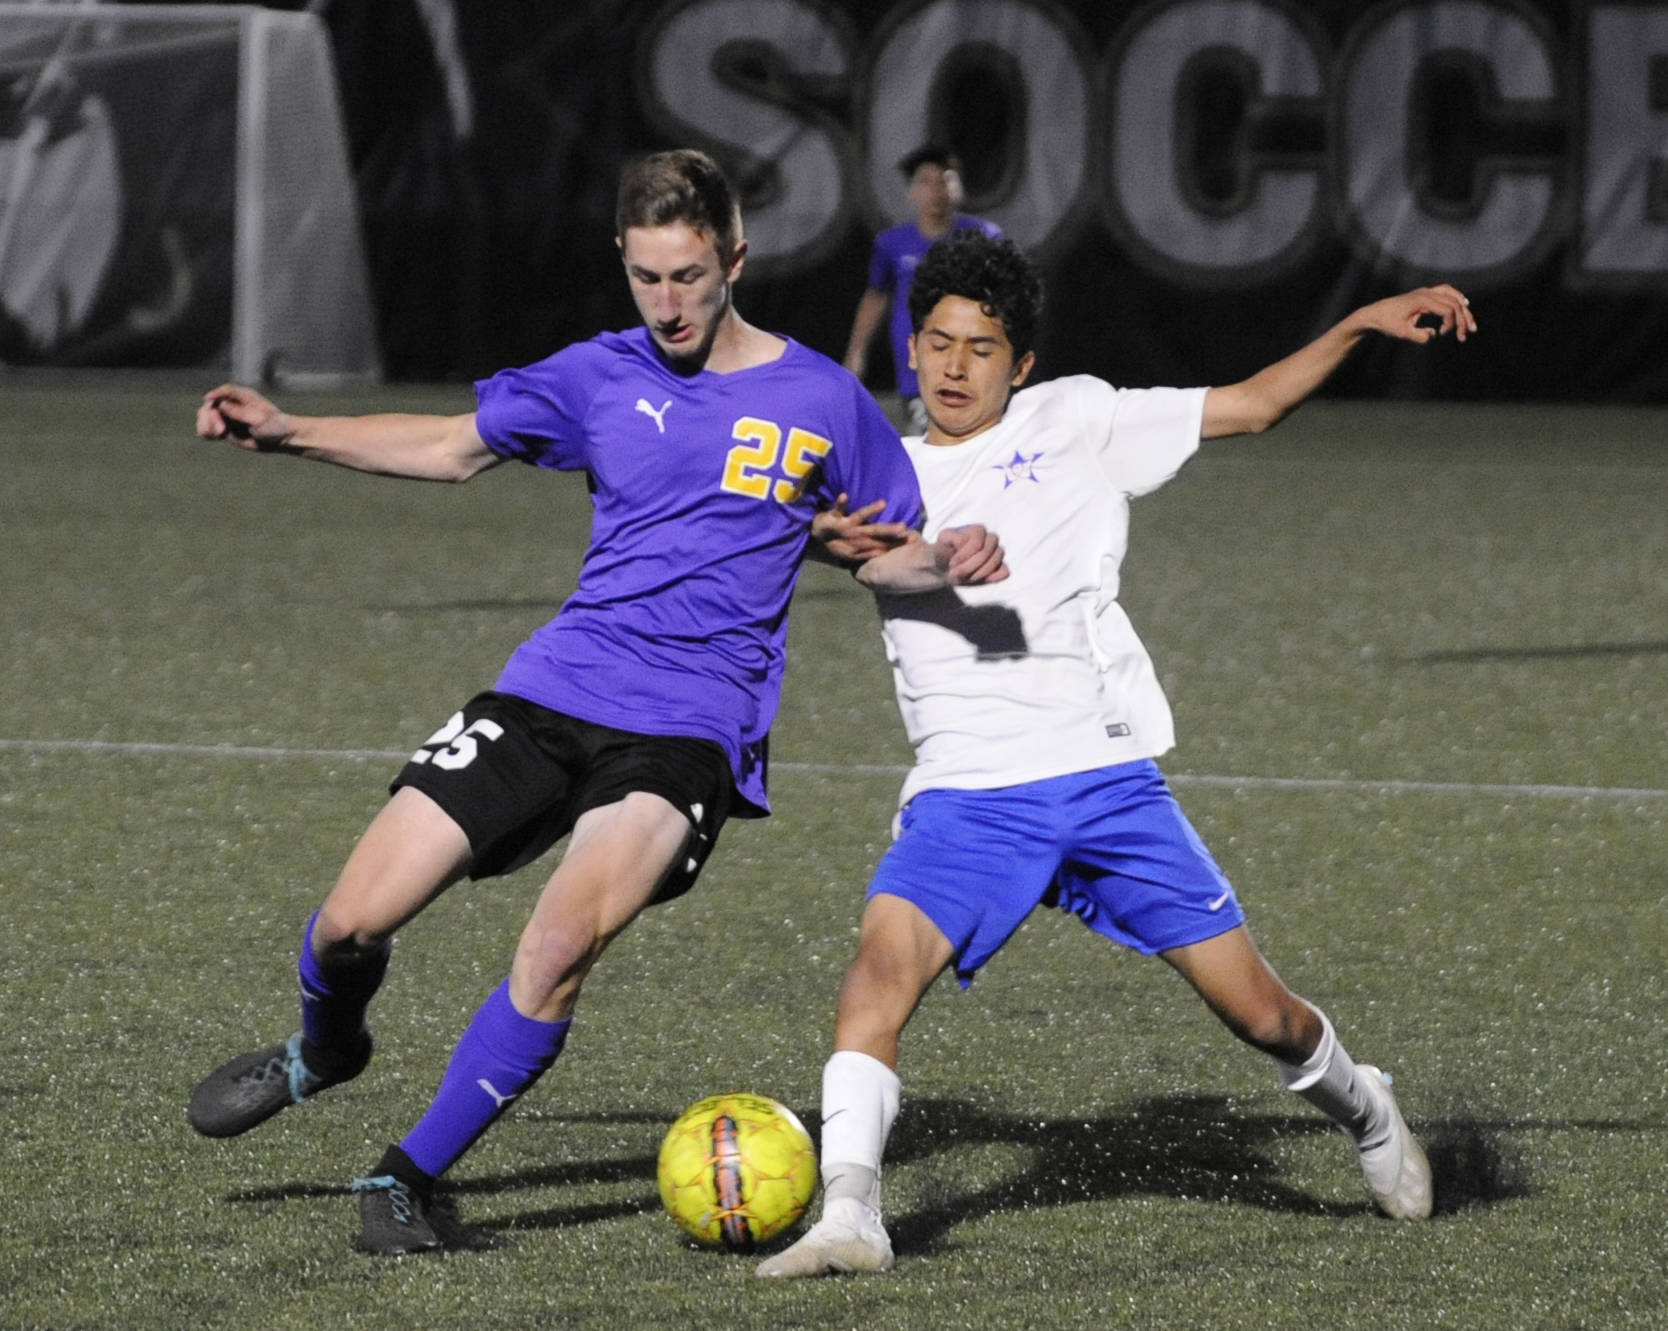 Sequim’s Brandon Wagner, left, and David Baltazar of Washington battle for control in the second half of Sequim’s 4-2 district playoff win on May 7. Sequim Gazette photo by Michael Dashiell